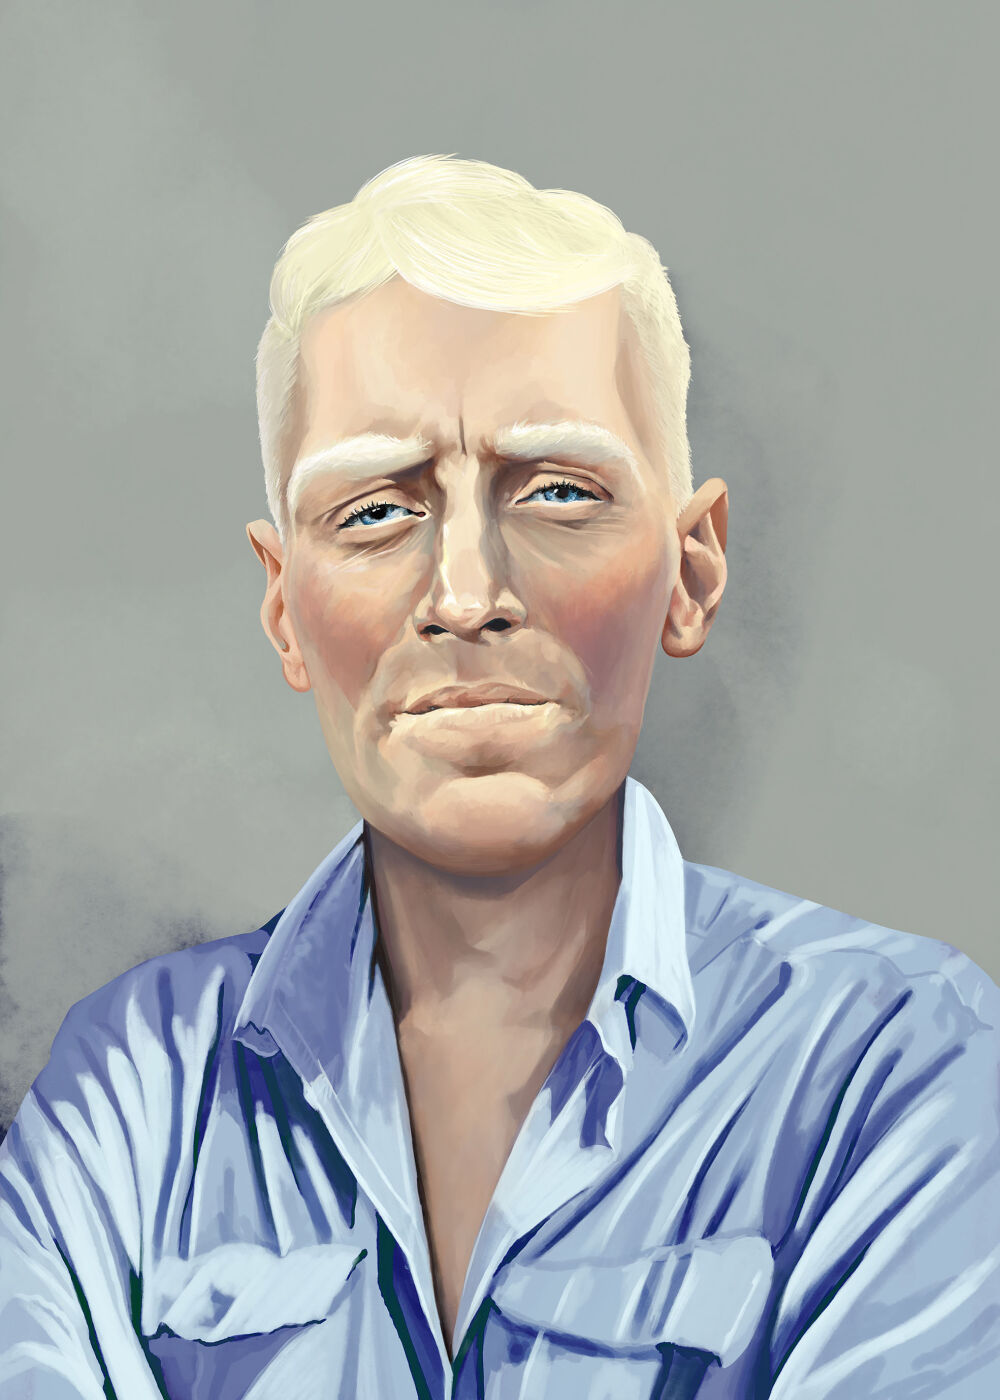 Illustrated photorealistic style portrait of Max von Sydow by Eplet